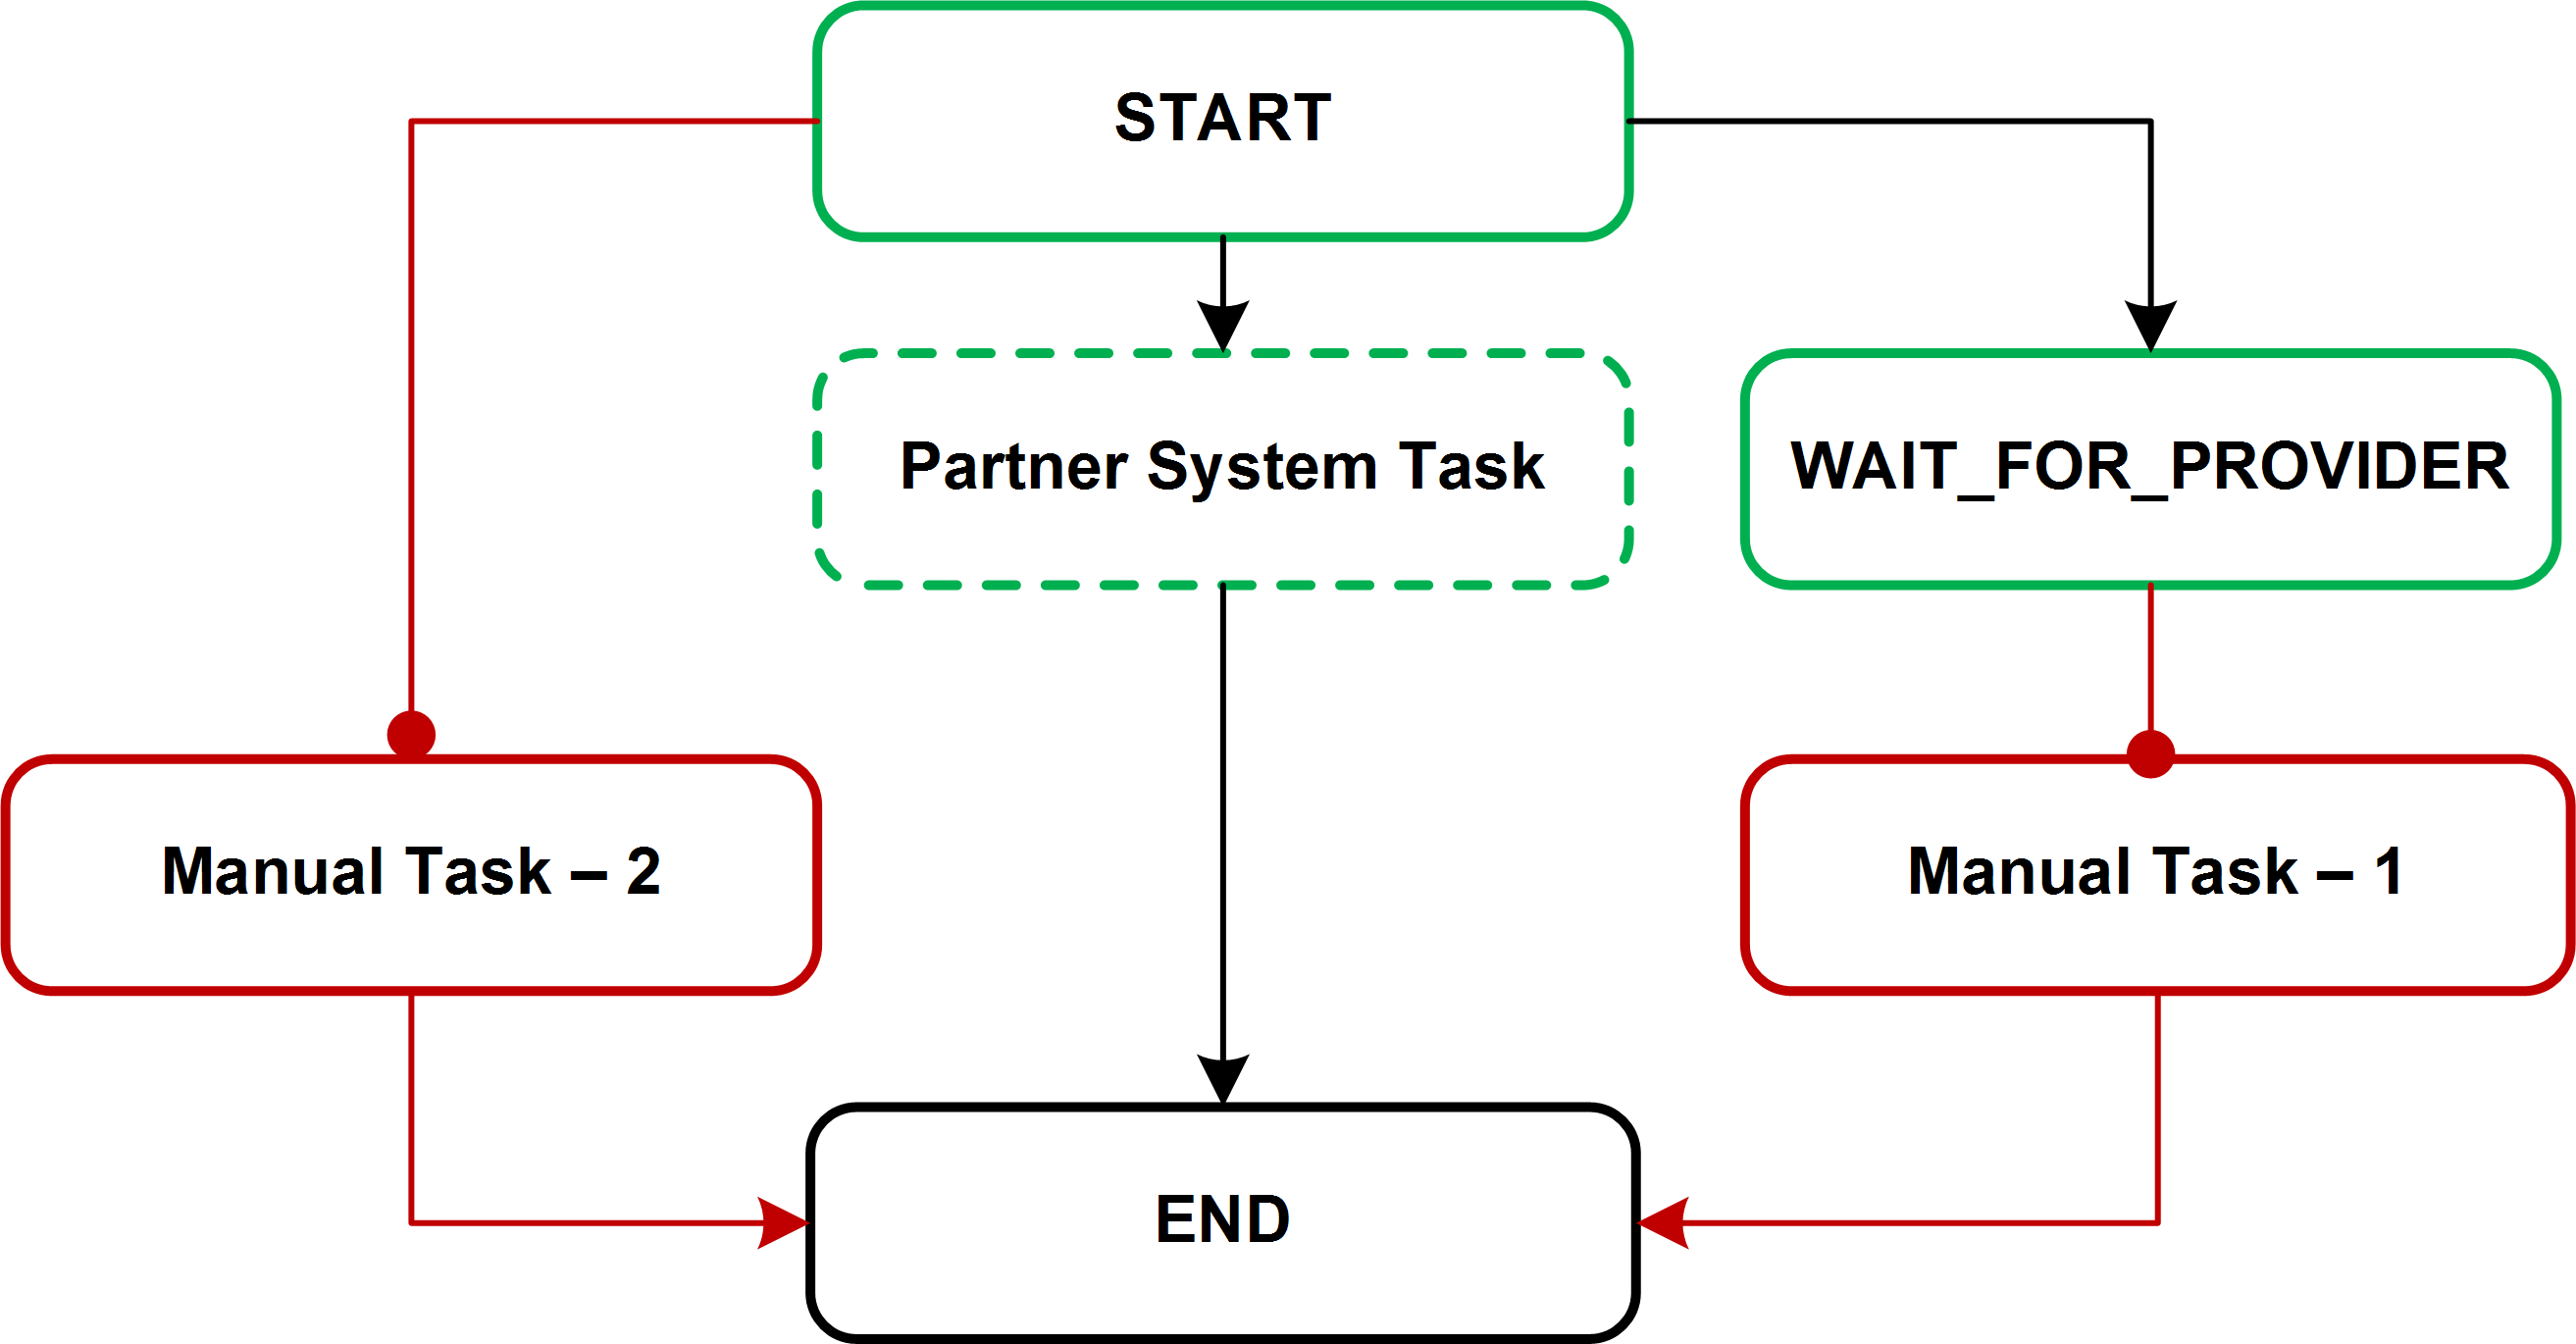 Image showing a simplified process including an OVI partner system task and two manual tasks.